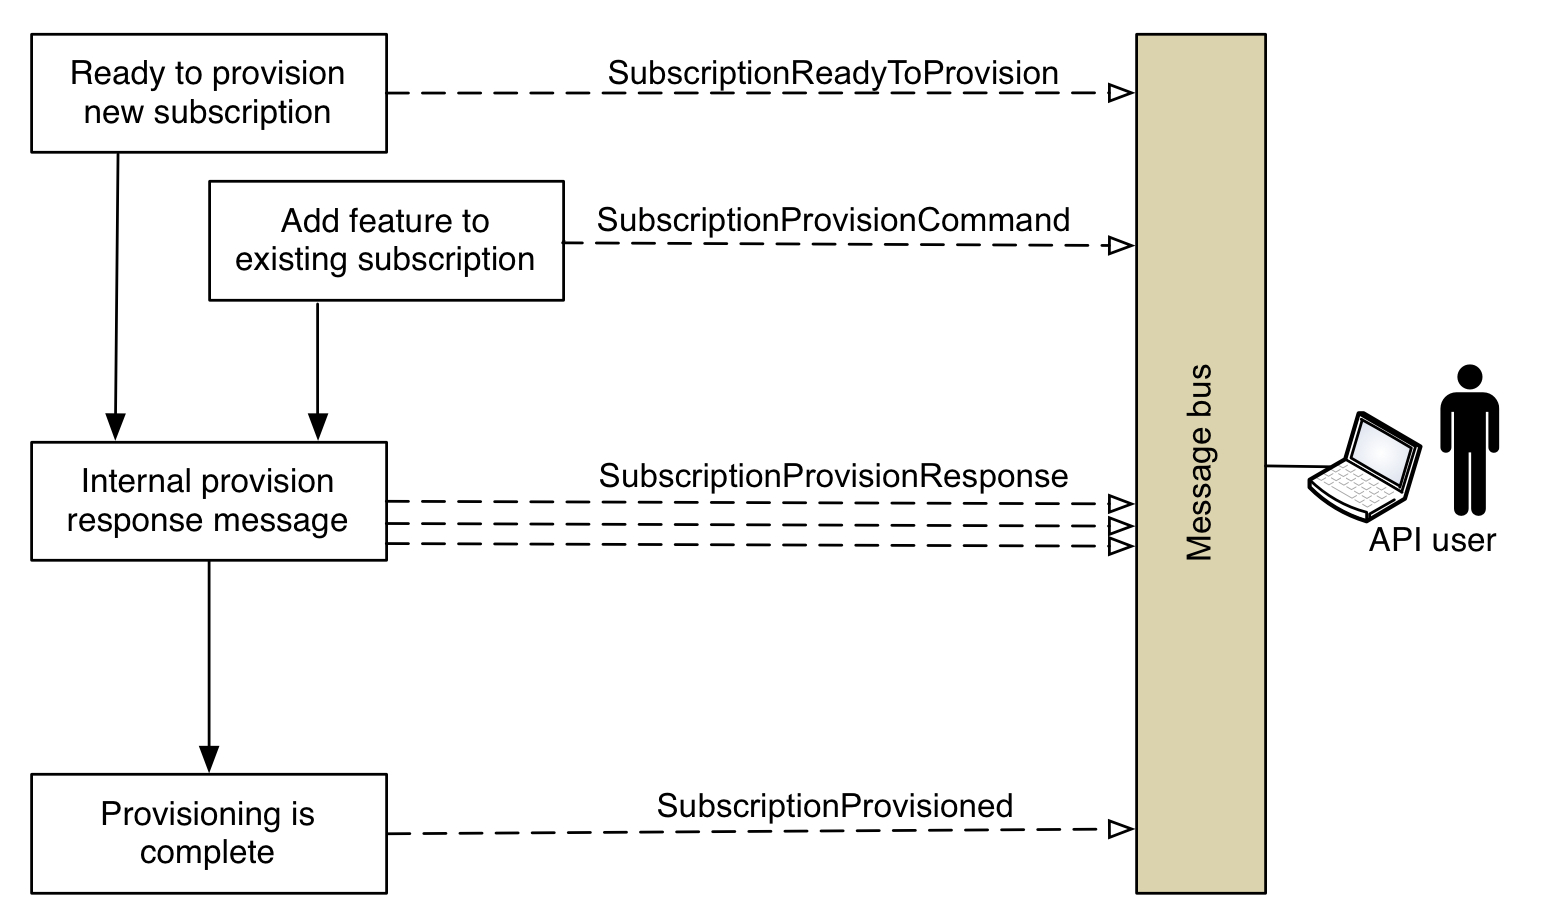 The image shows the SmileSubscription that Smile emits during the provisioning process.